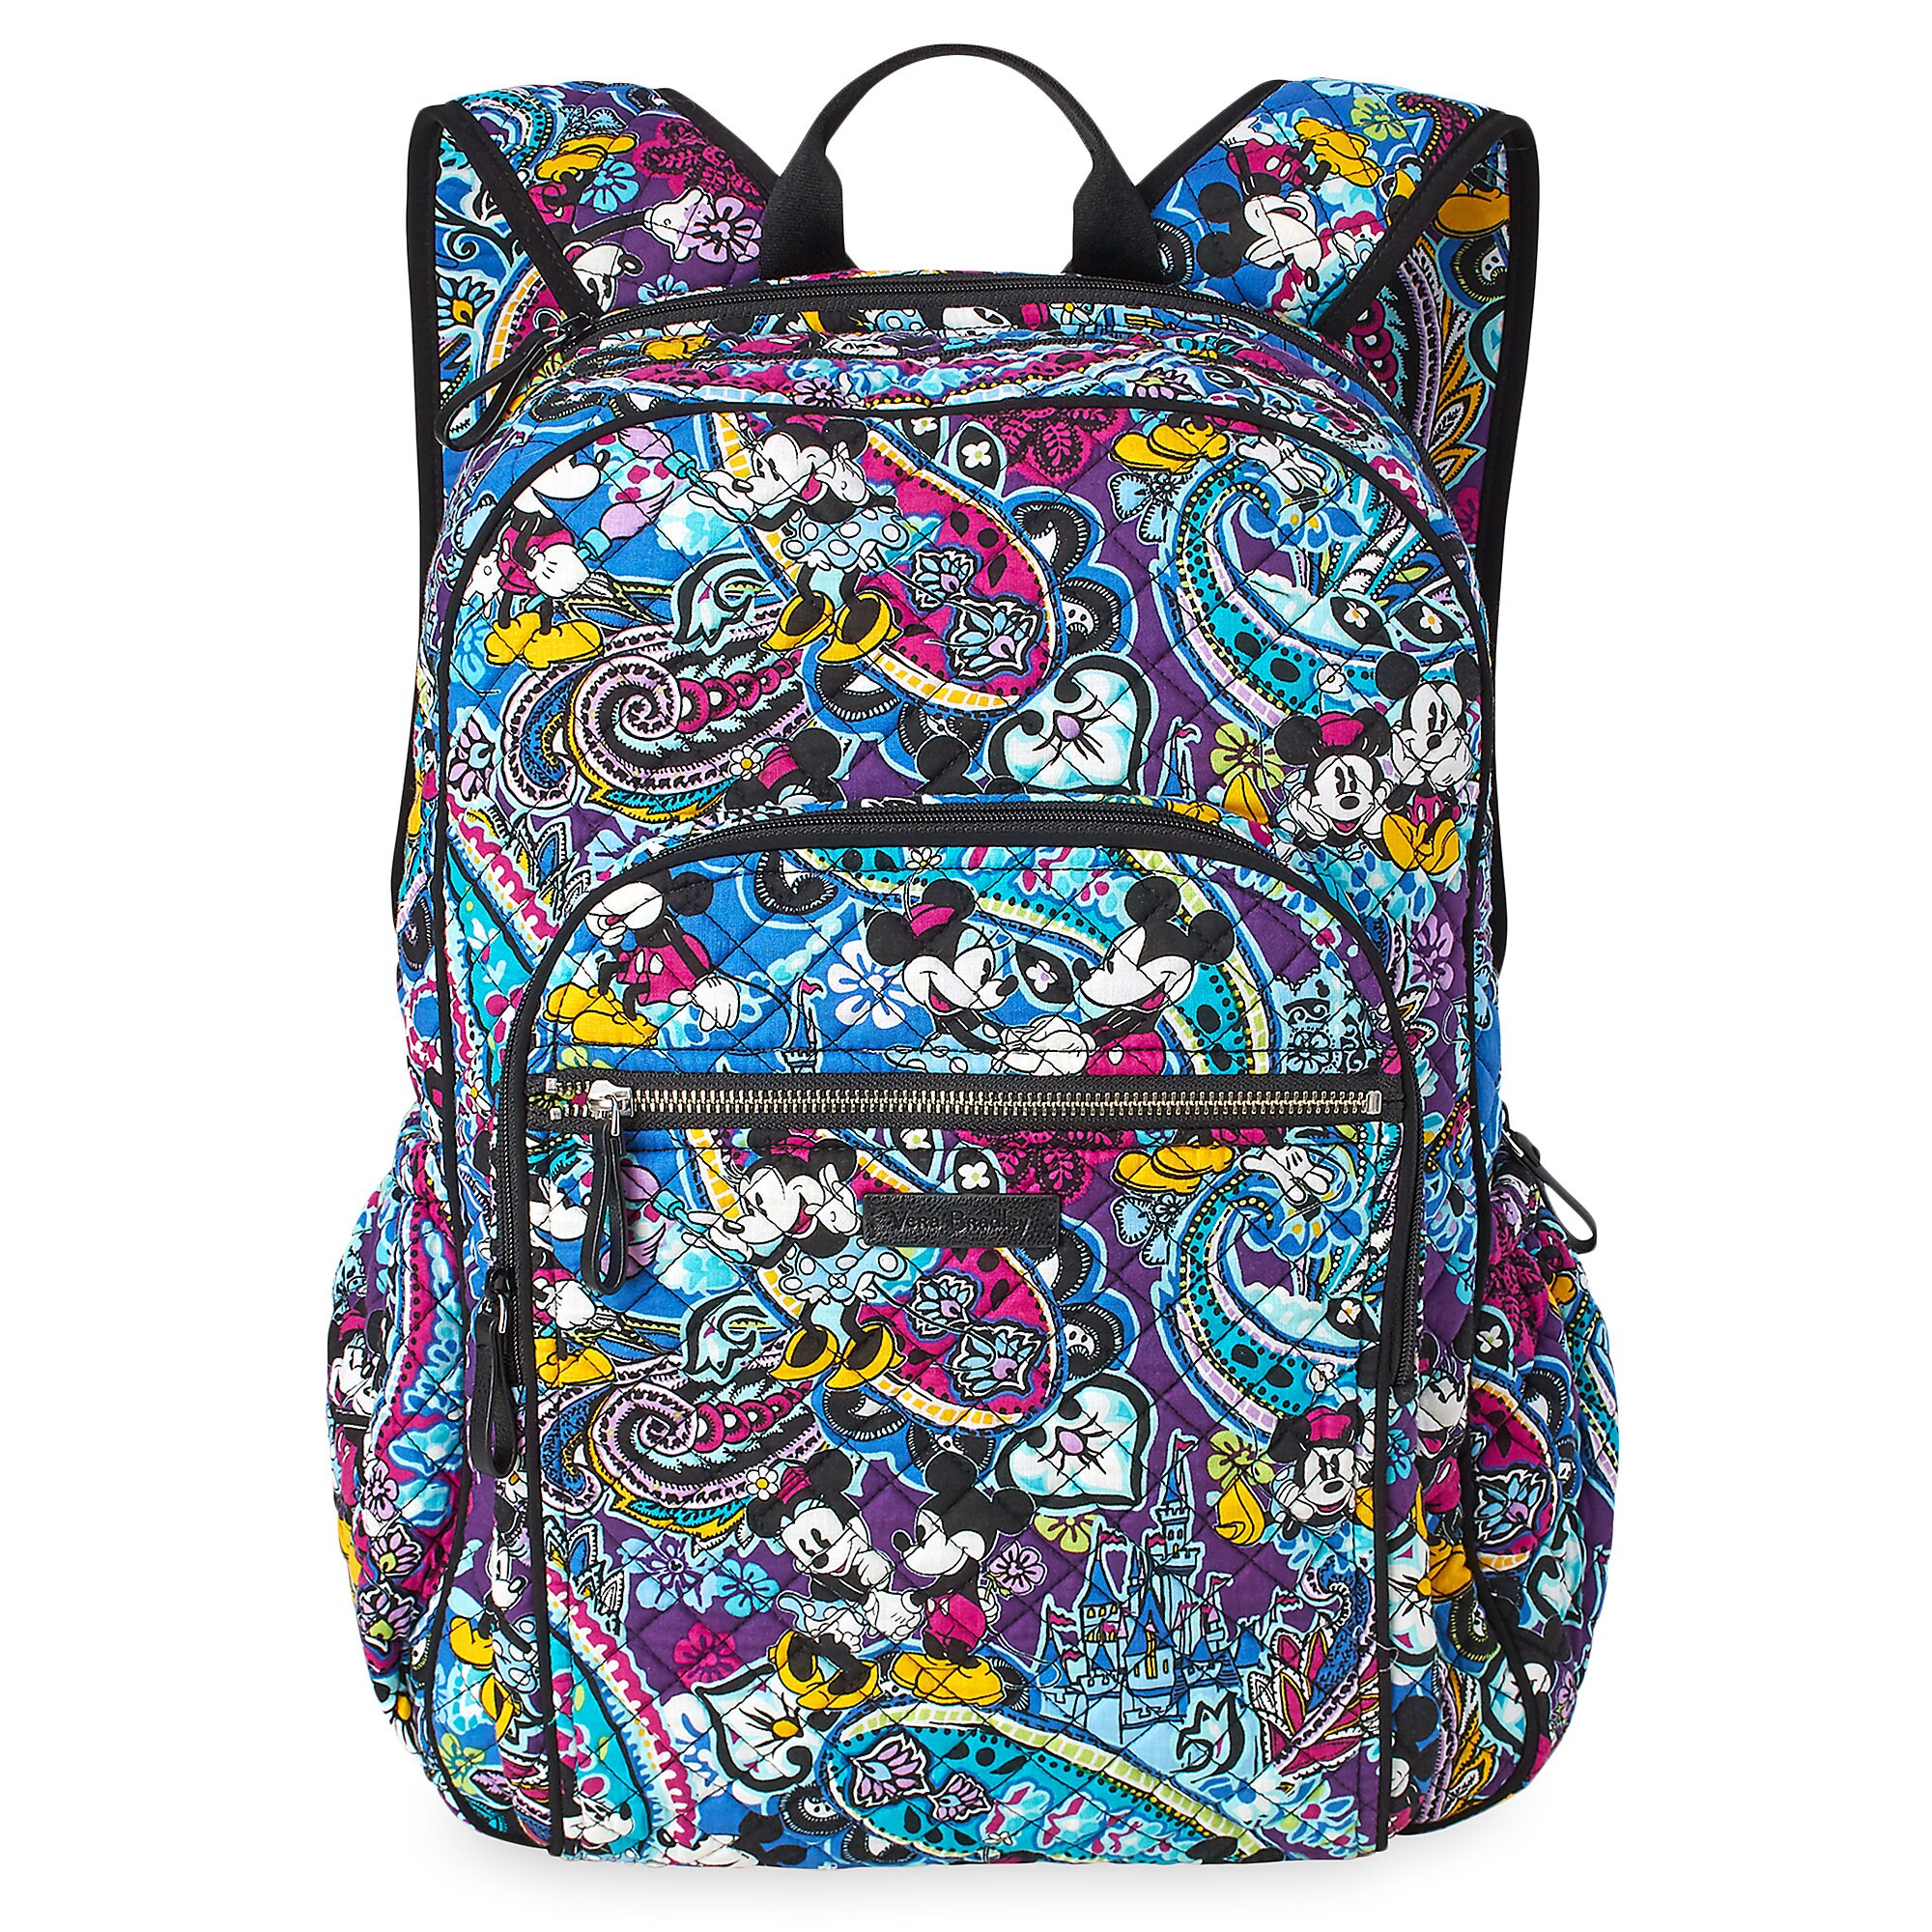 Mickey and Minnie Mouse Paisley Campus Backpack by Vera Bradley